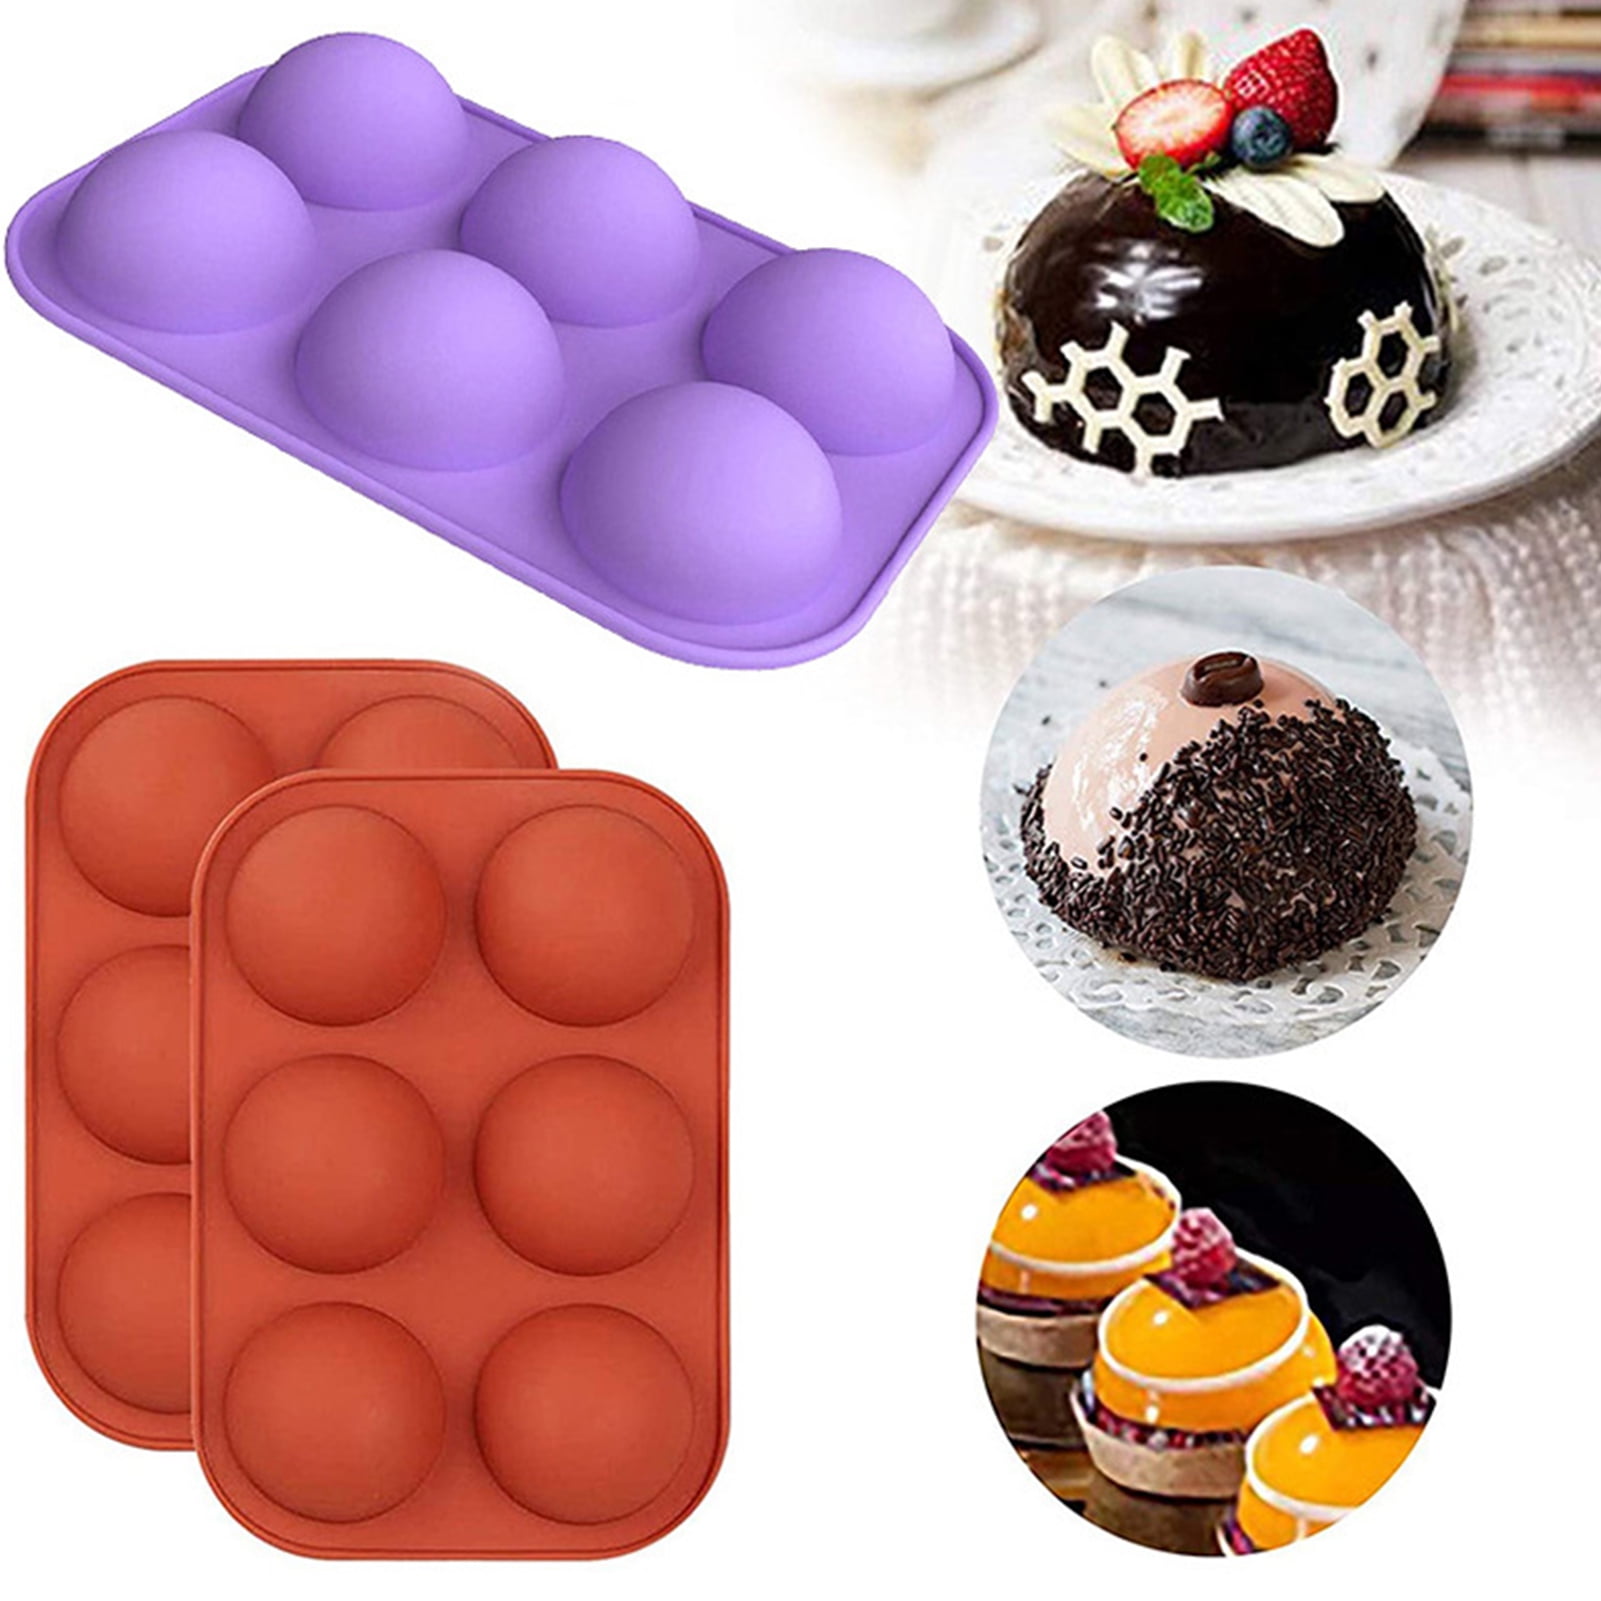 Frcolor Bestomz 6-Cavity Half Circle Silicone Mold for DIY Chocolate Desserts Ice Cream Bombes Cakes Soap Resin Items Making, Adult Unisex, Size: 29x17x3CM